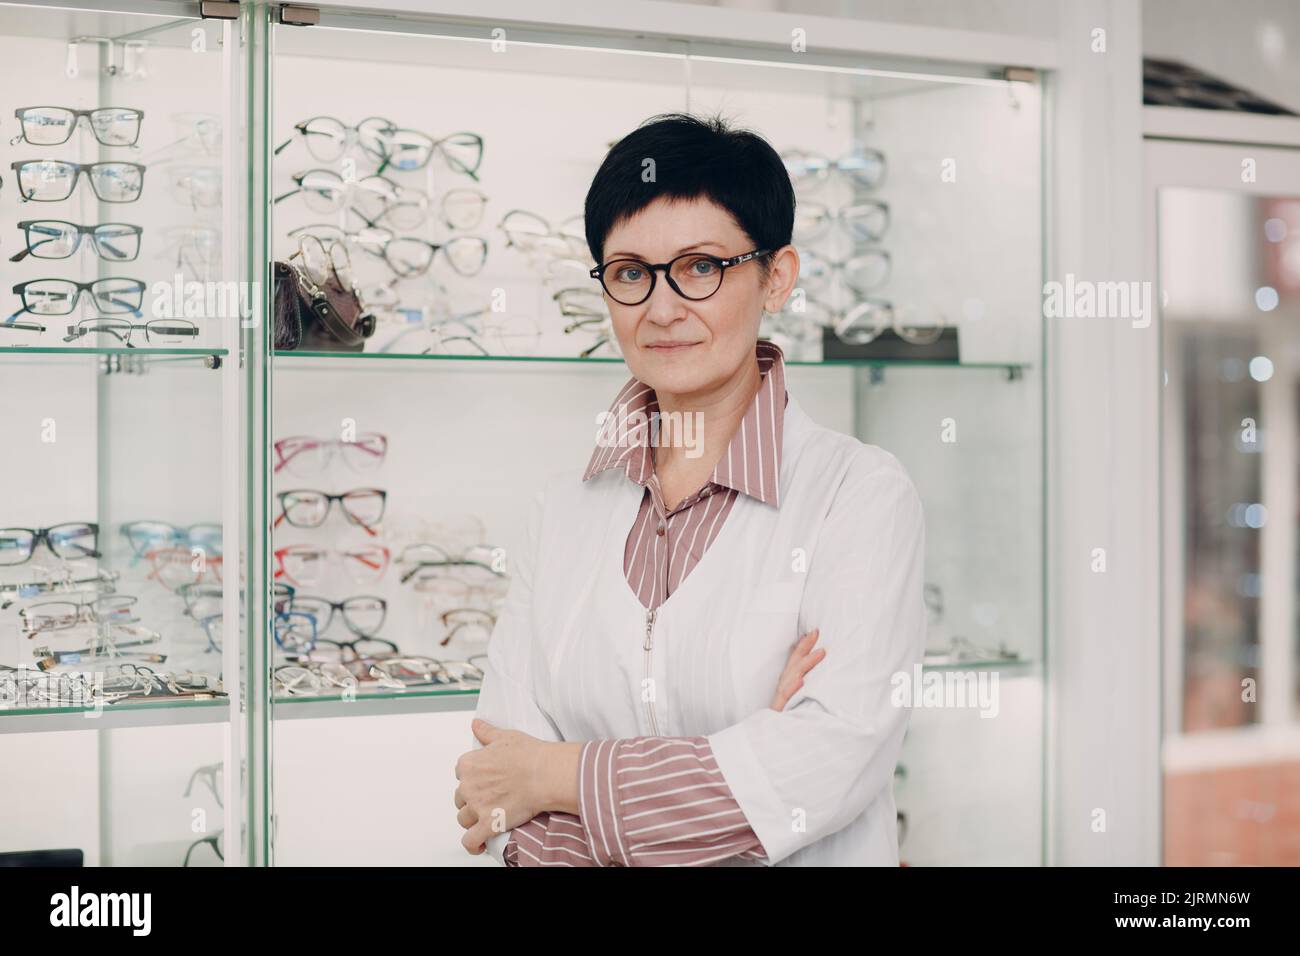 Portrait of an optometrist ophthalmologist middle aged adult woman wearing protective medical face mask. Stock Photo